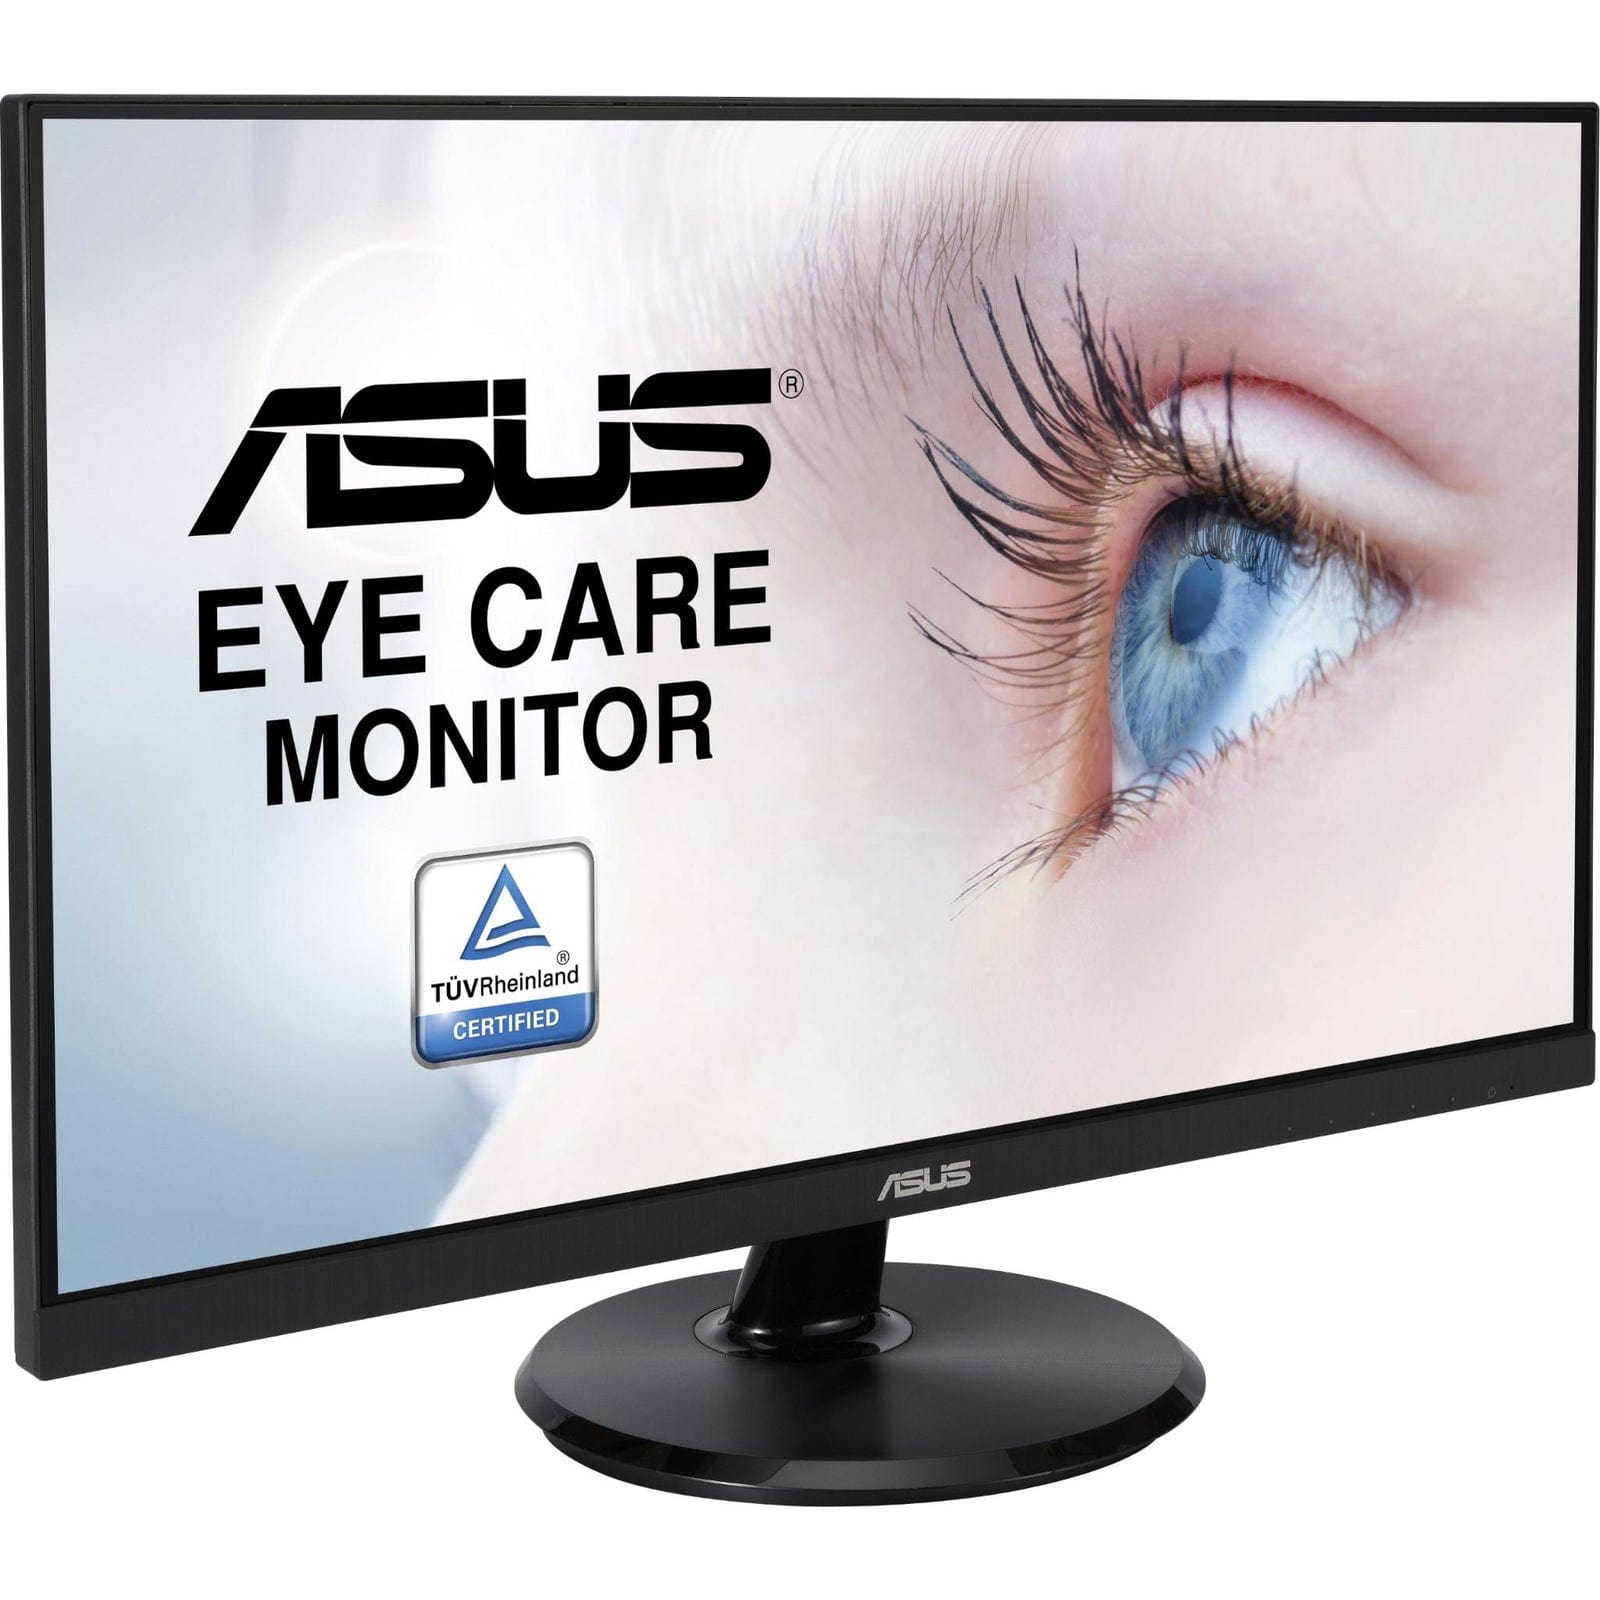 Asus 23.8" FHD Type C Monitor with 65W Power Delivery